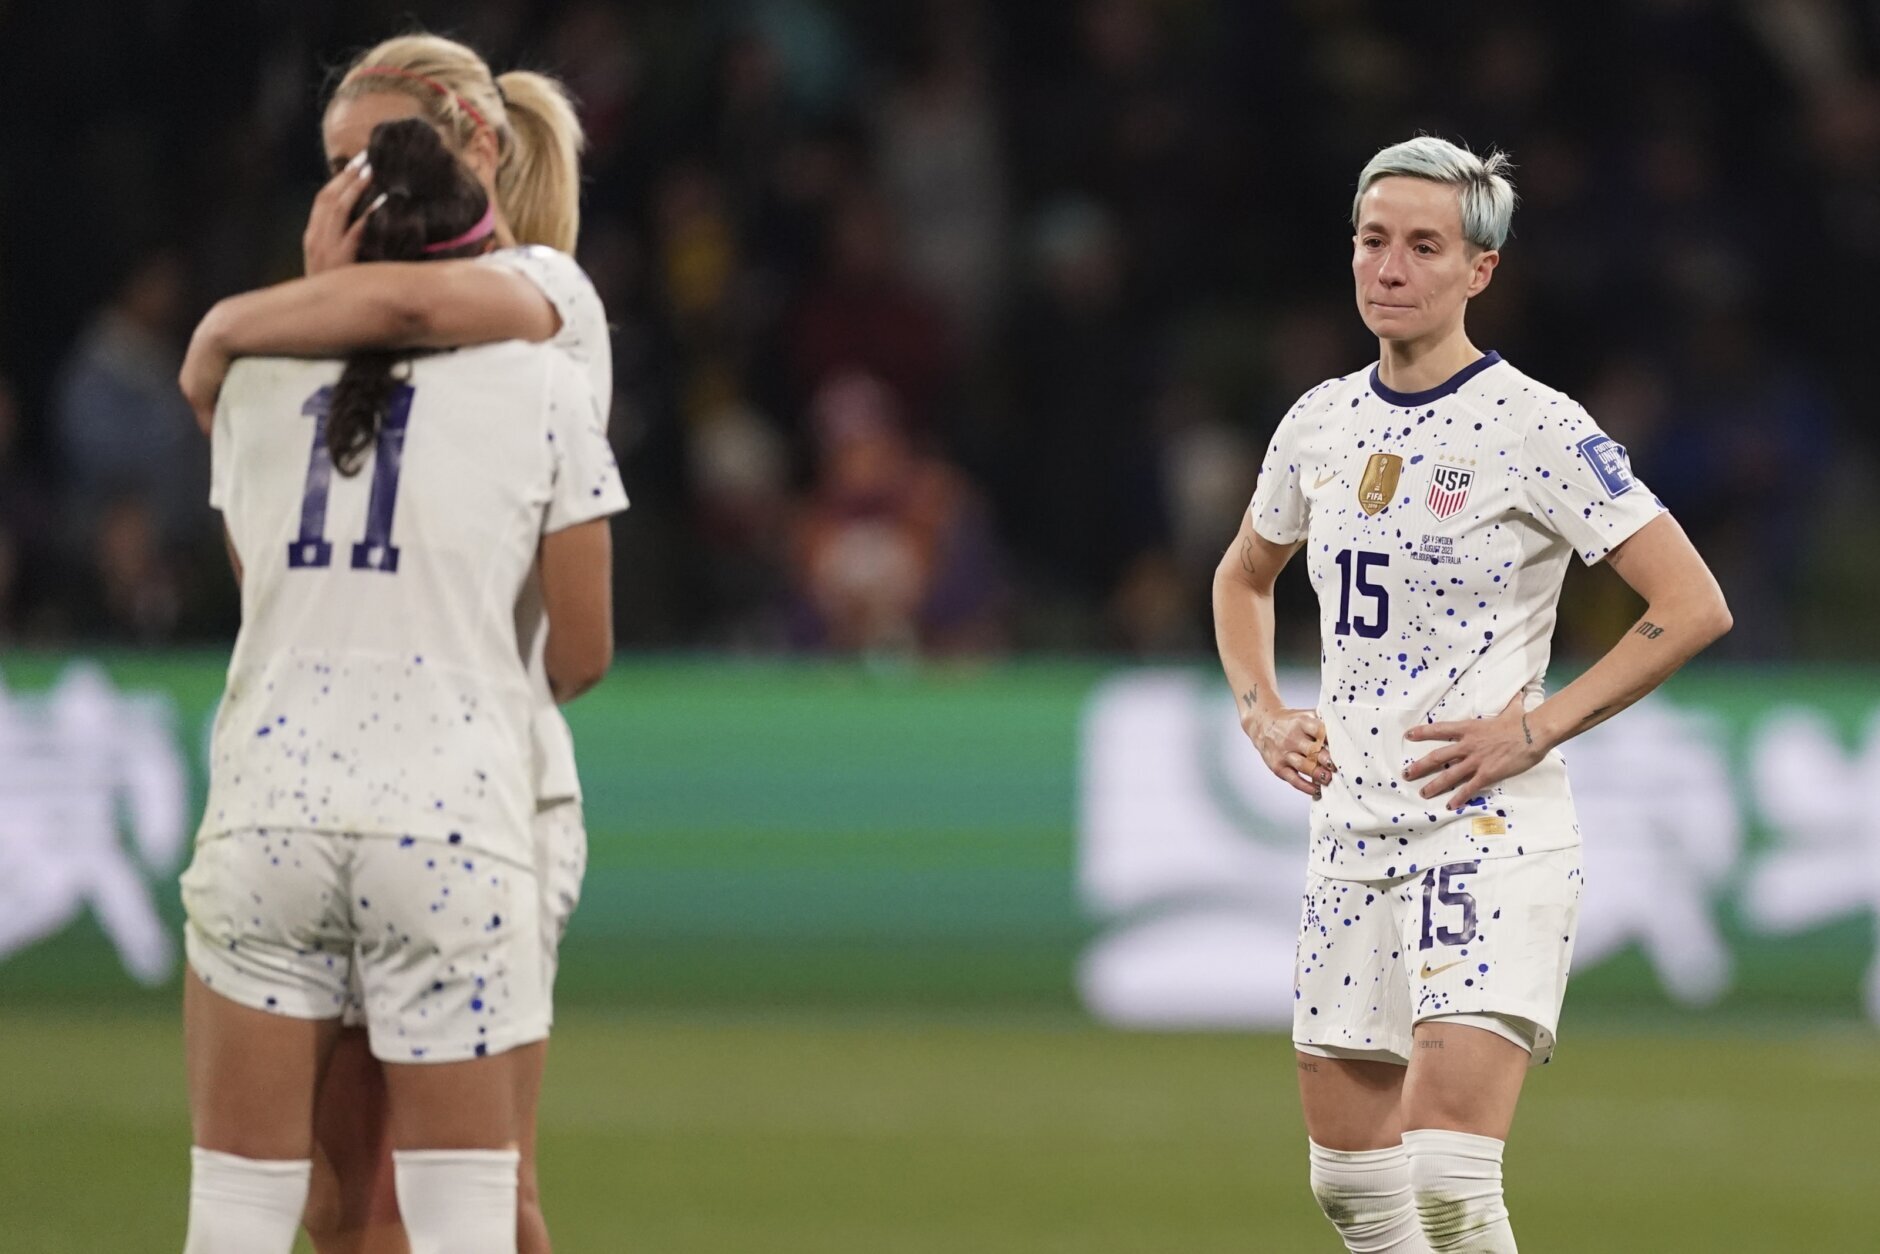 Defending champion U.S. crashes out of Women's World Cup after losing to  Sweden on penalty kicks - Washington Times